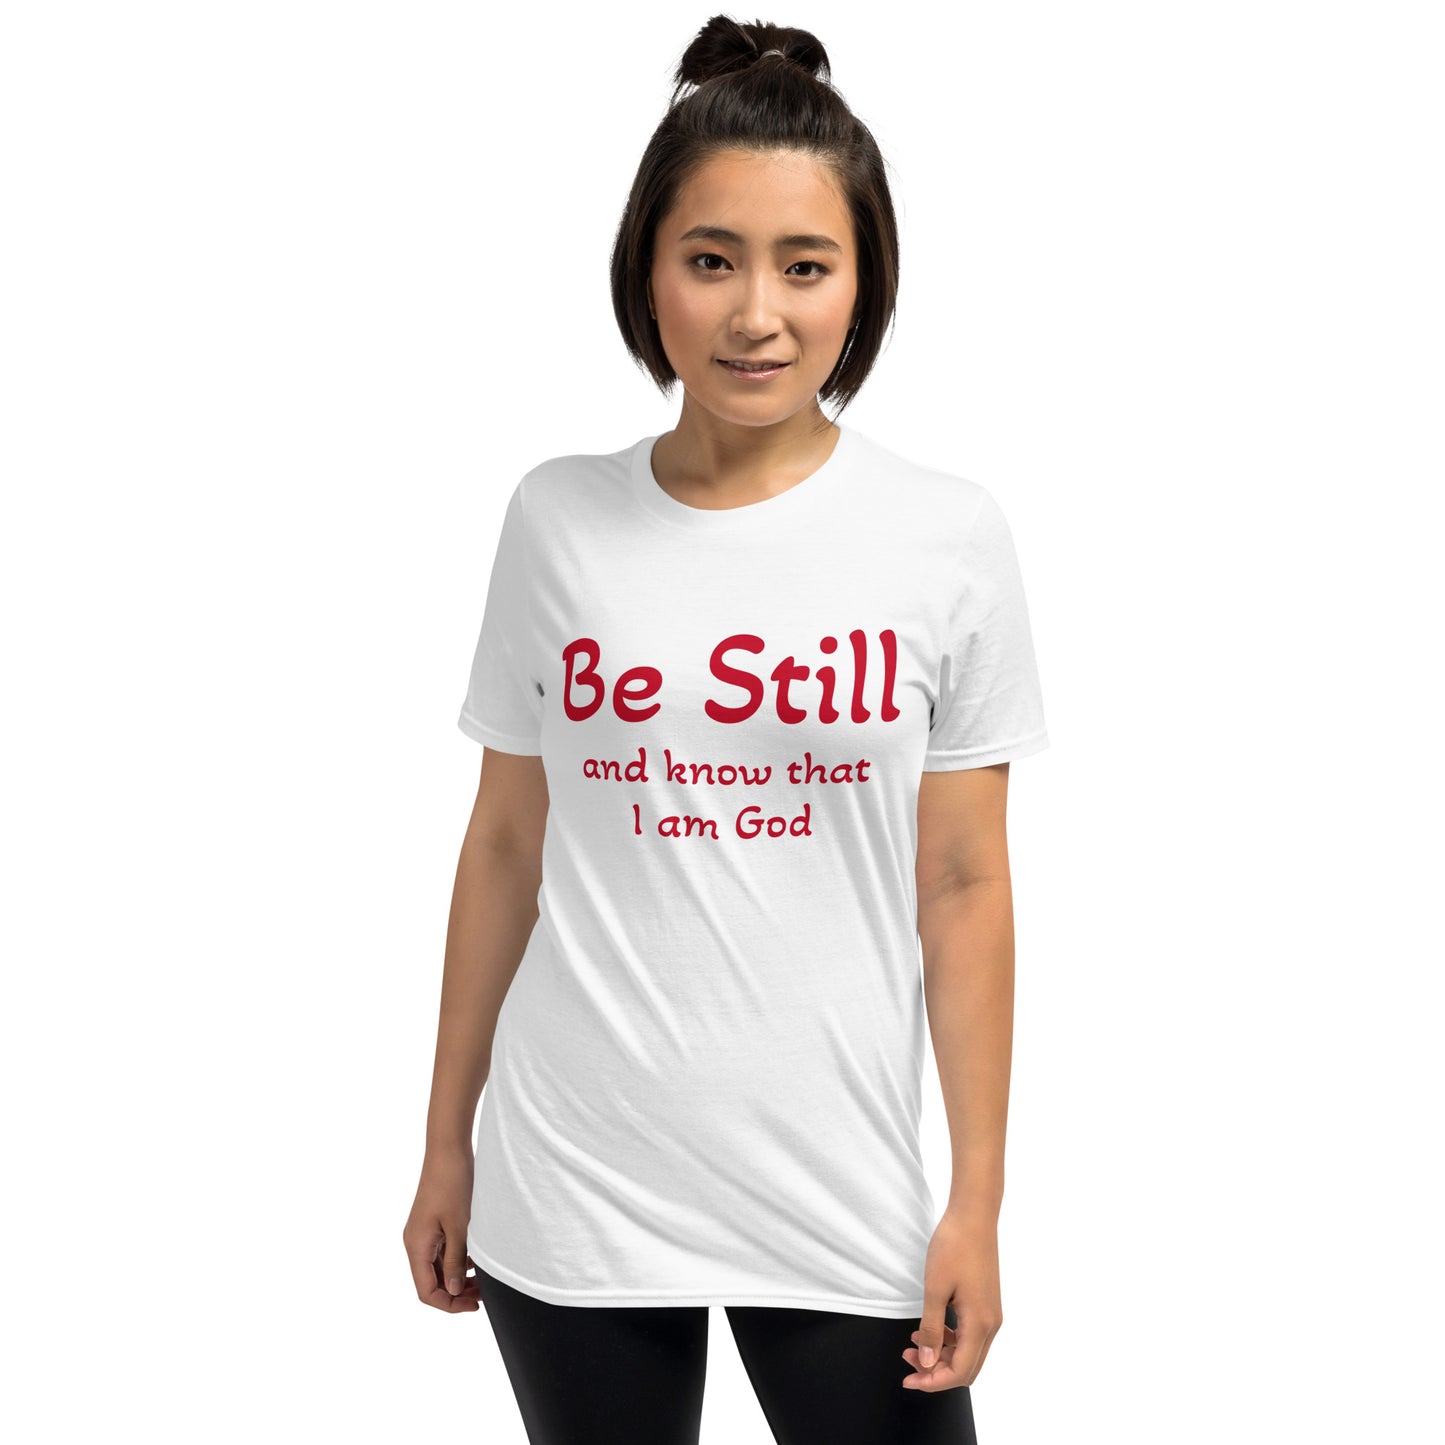 Unisex soft-style White T-shirt with Be Still and Know that I am God in Red letters